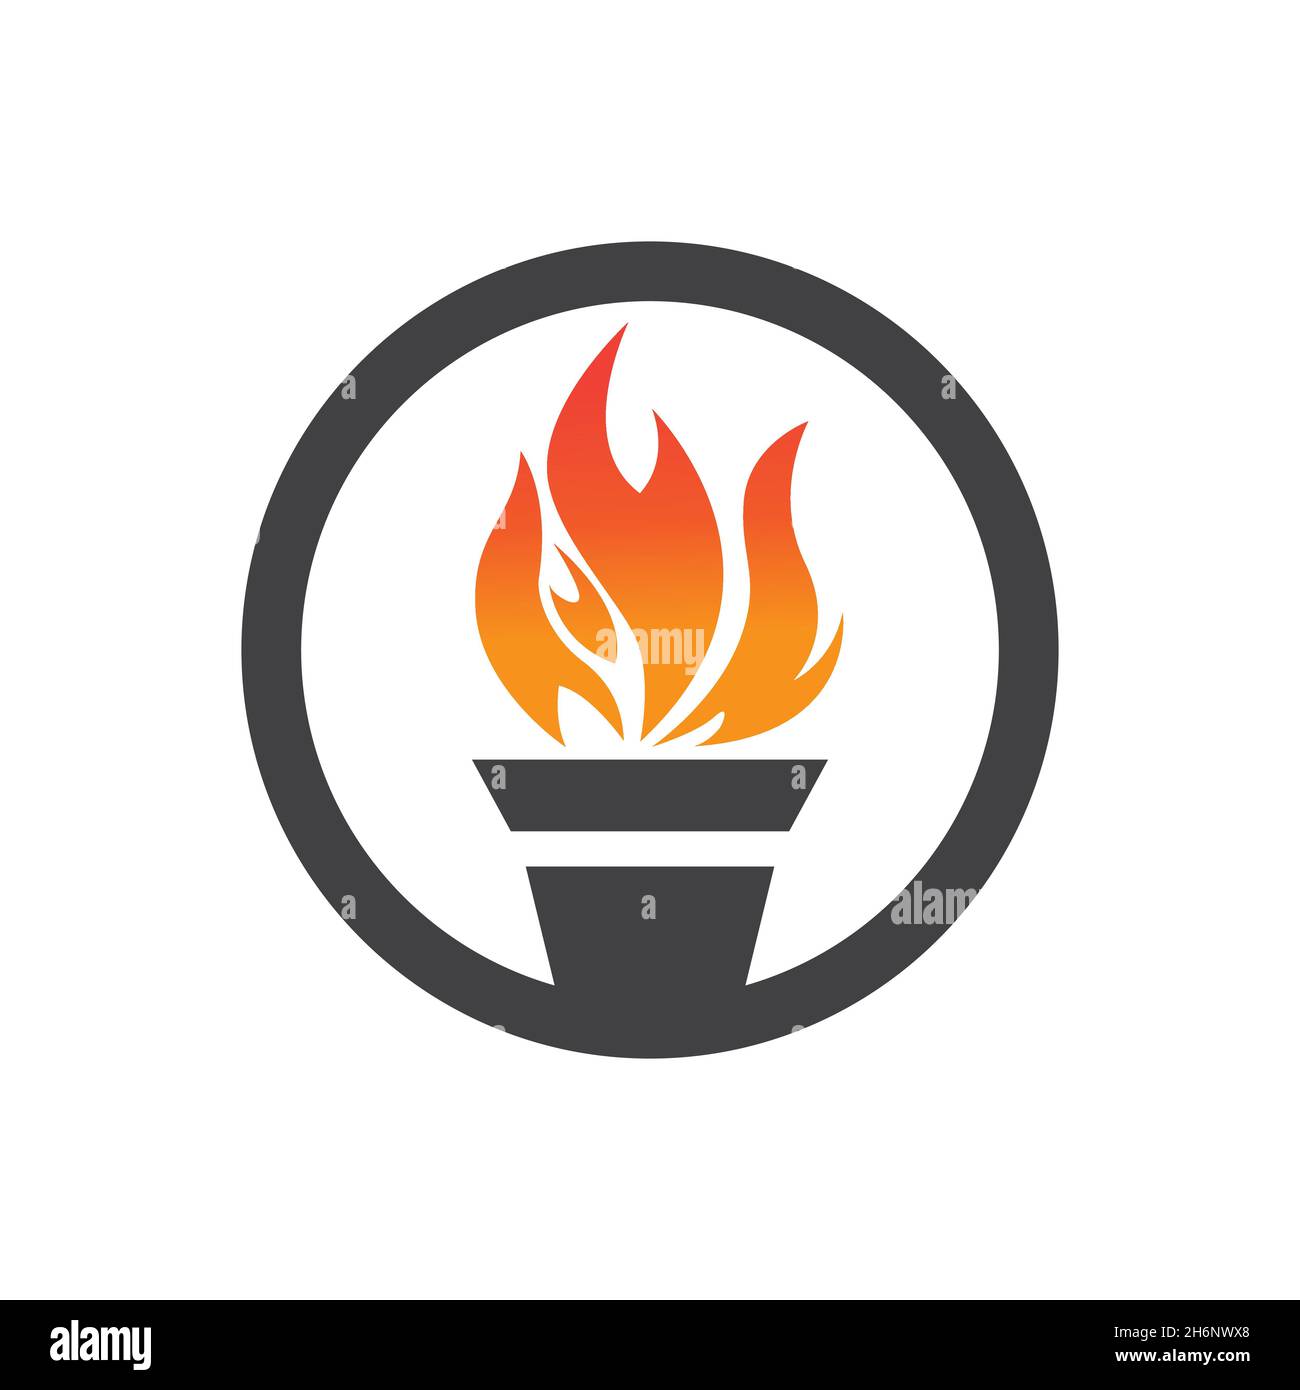 vector design. logo created from shape of abstract torch logo. Stock Vector